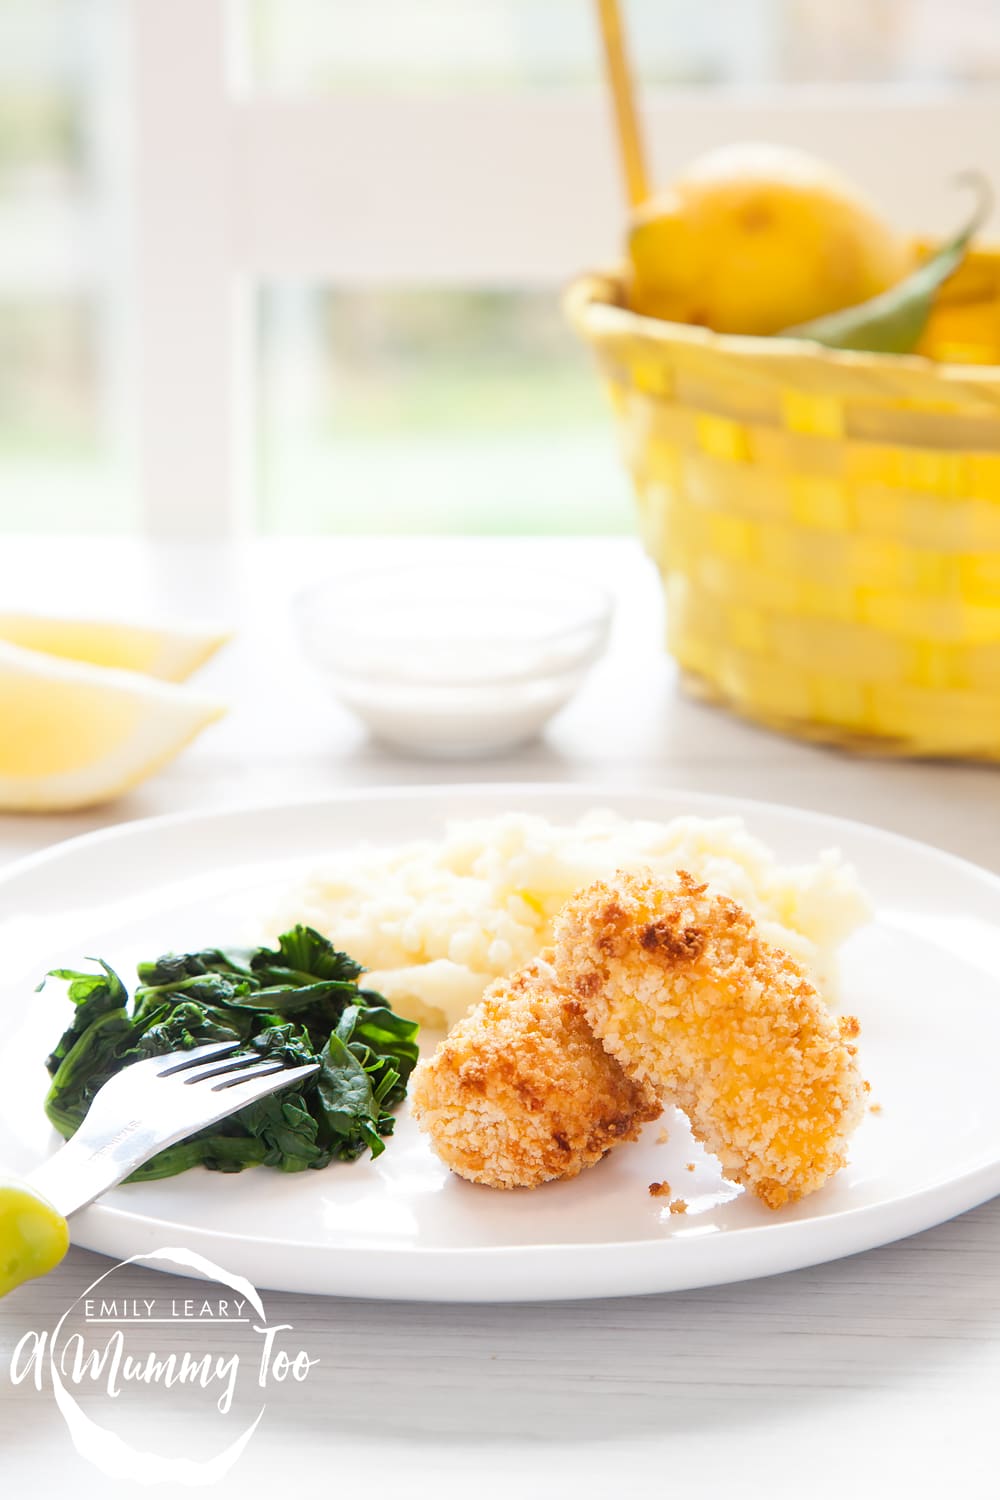 These crispy cod goujons aka homemade fish fingers are a wonderful way to get the kids involved with cooking